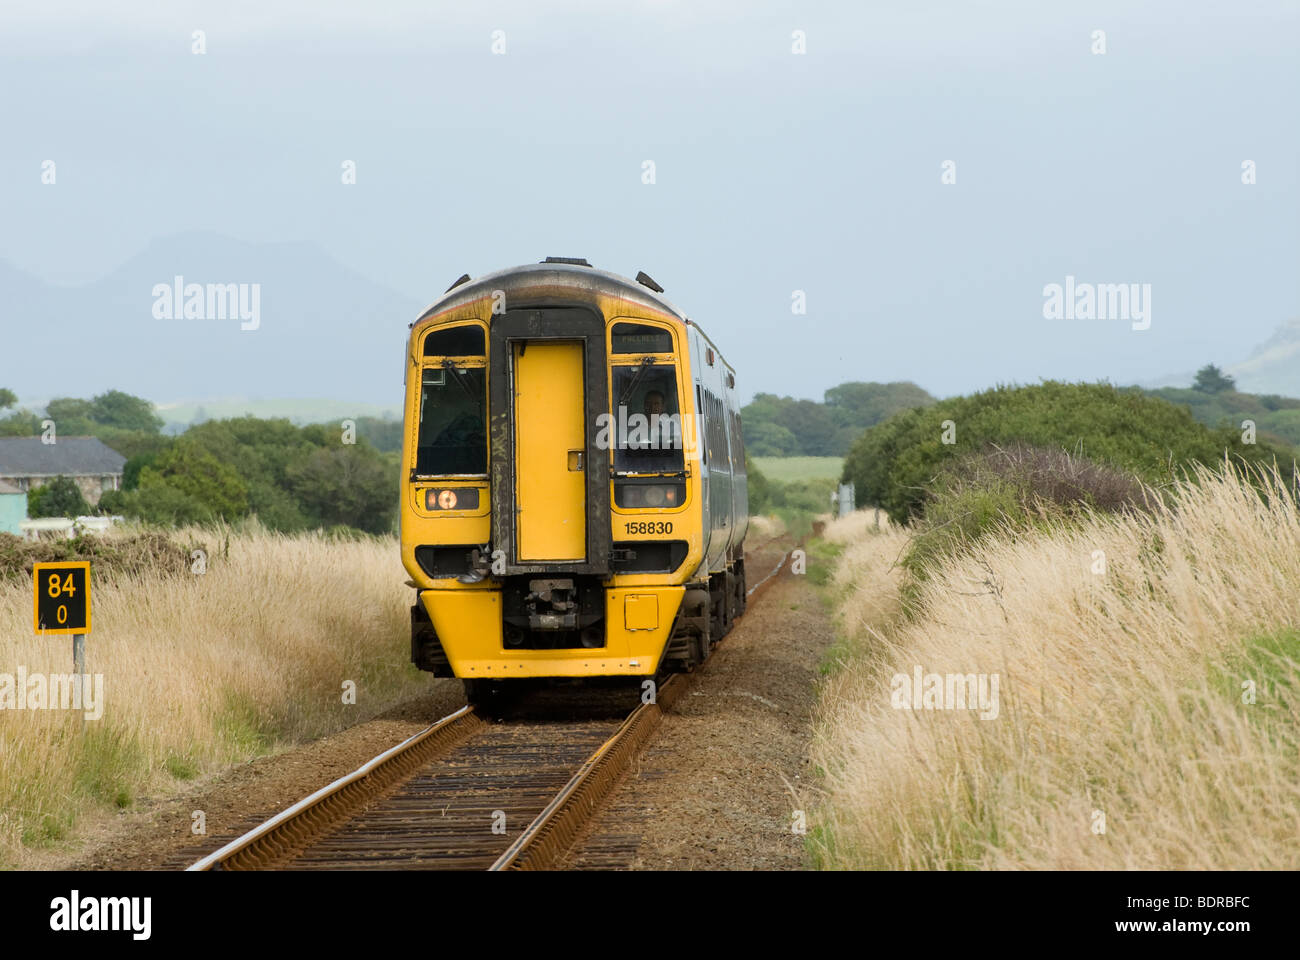 Class 158 train in Arriva Train Wales livery bound for Pwllheli on the welsh Cambrian coast line, Wales Stock Photo